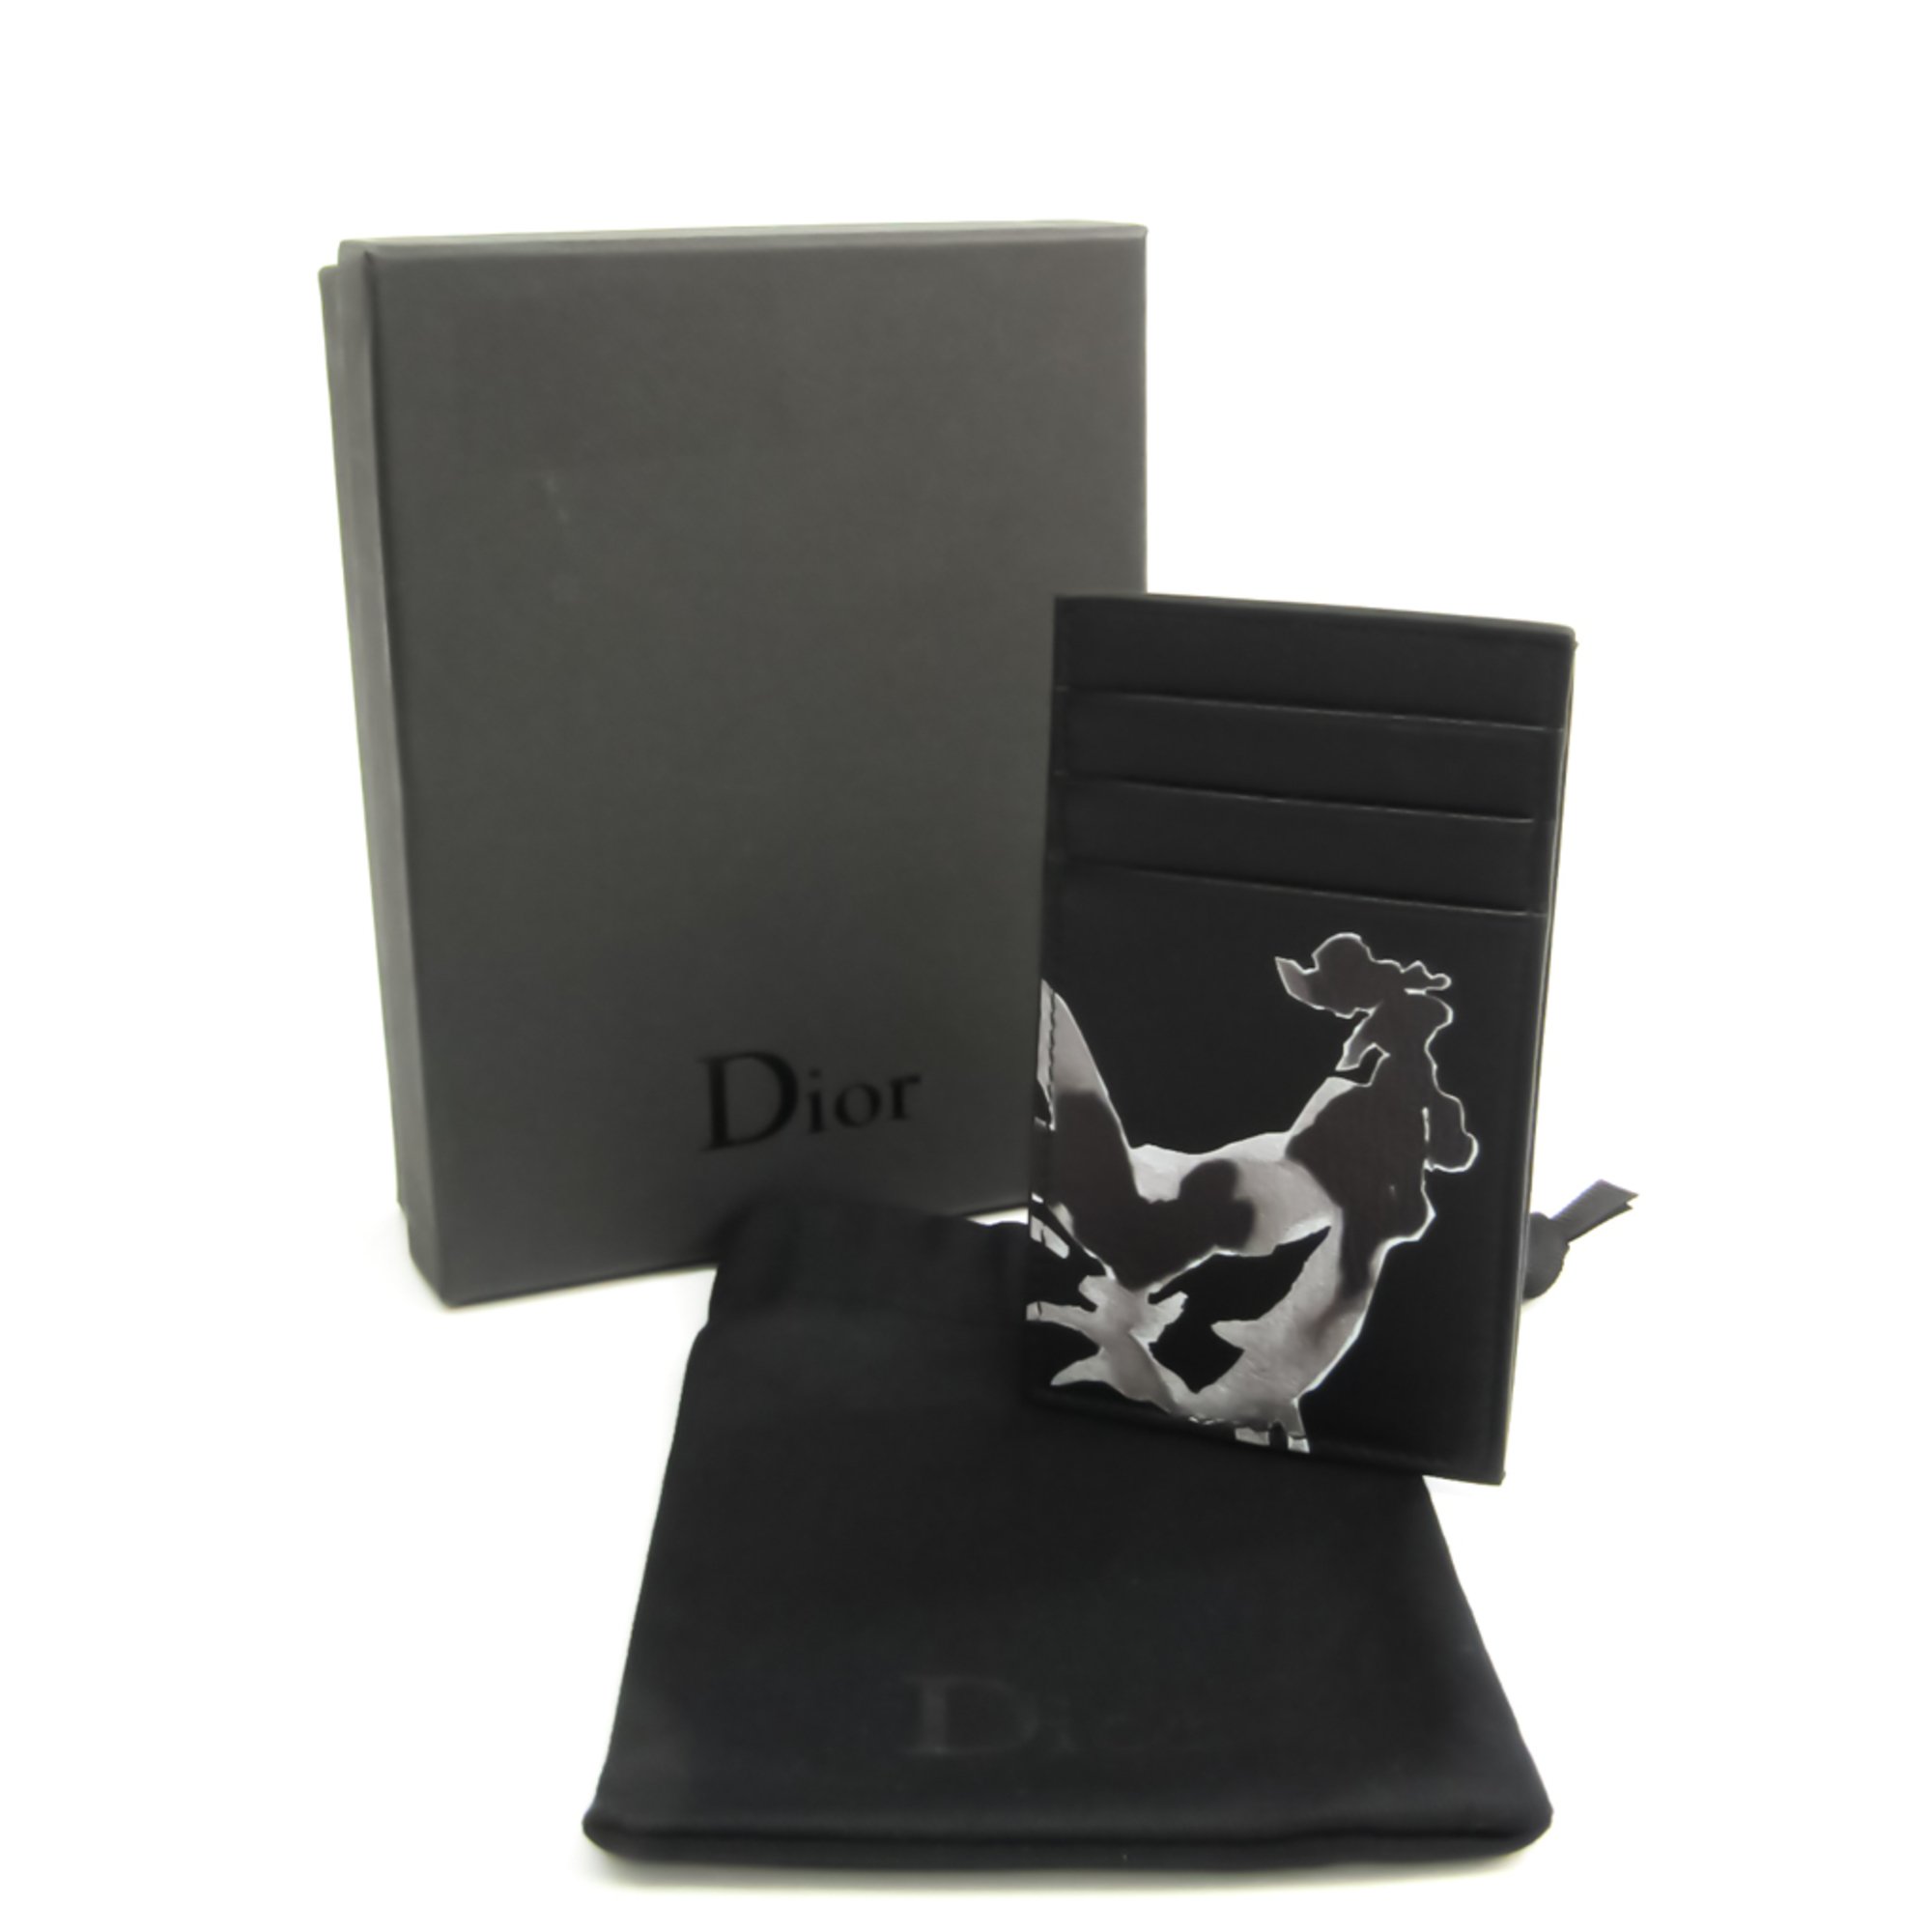 Dior Homme Leather Card Case Black,Gray